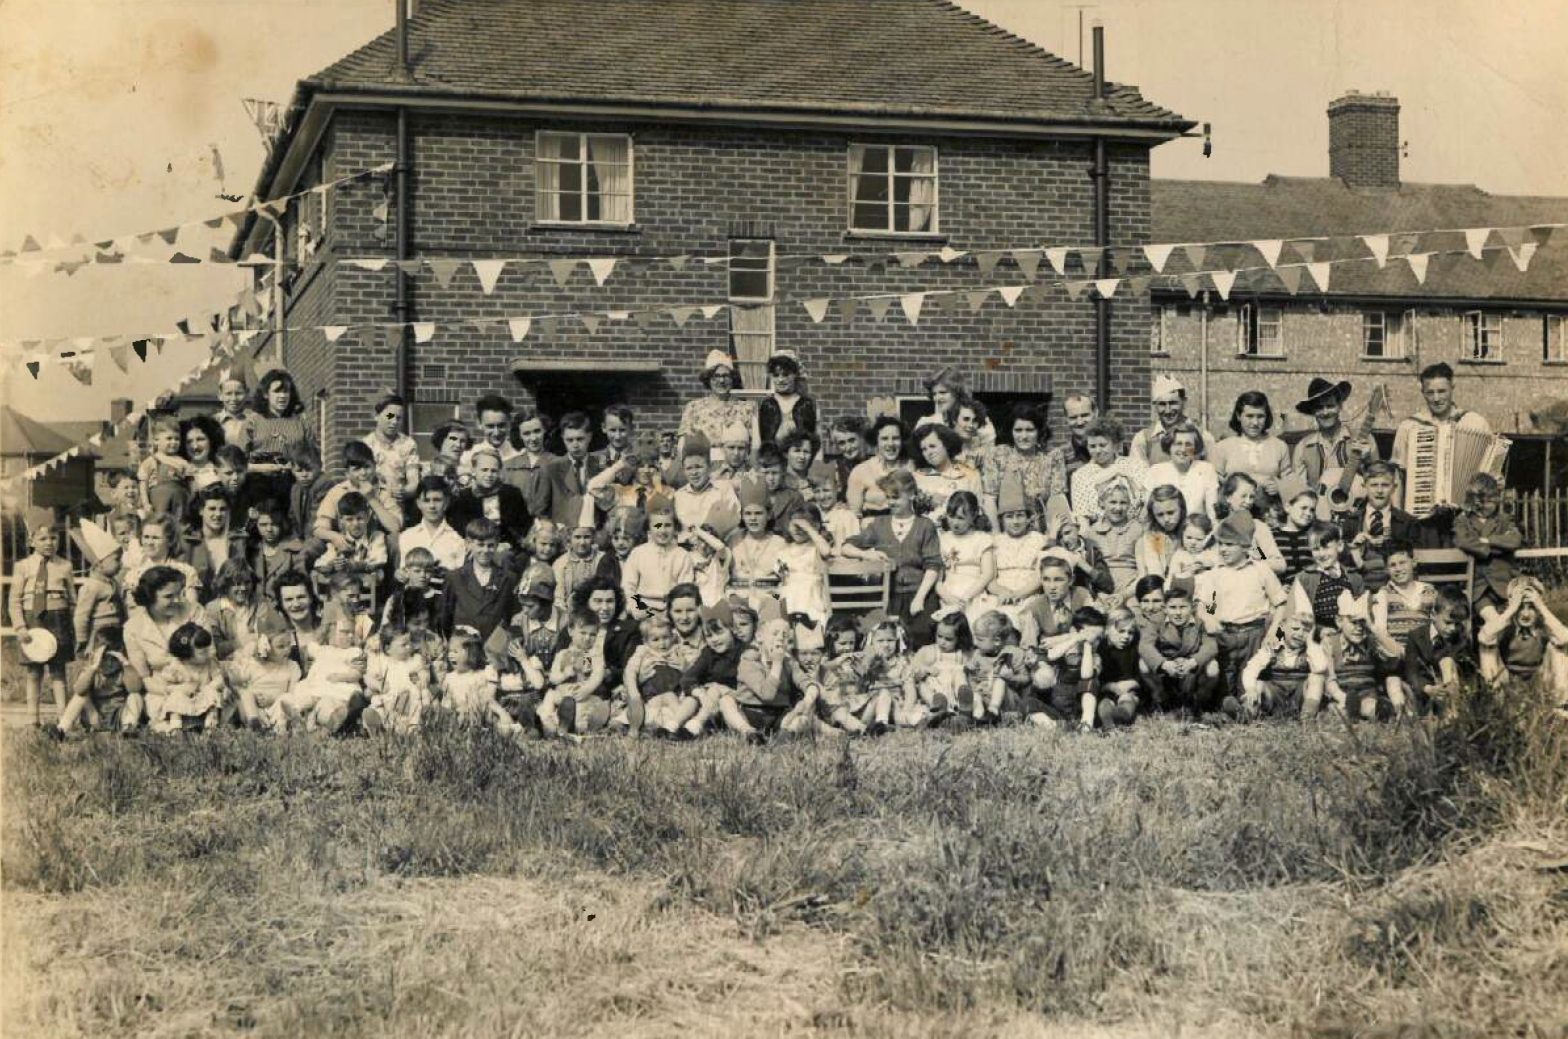 Celebratory black and white group photo from 1953 of many people outside a brick building with bunting strung up.